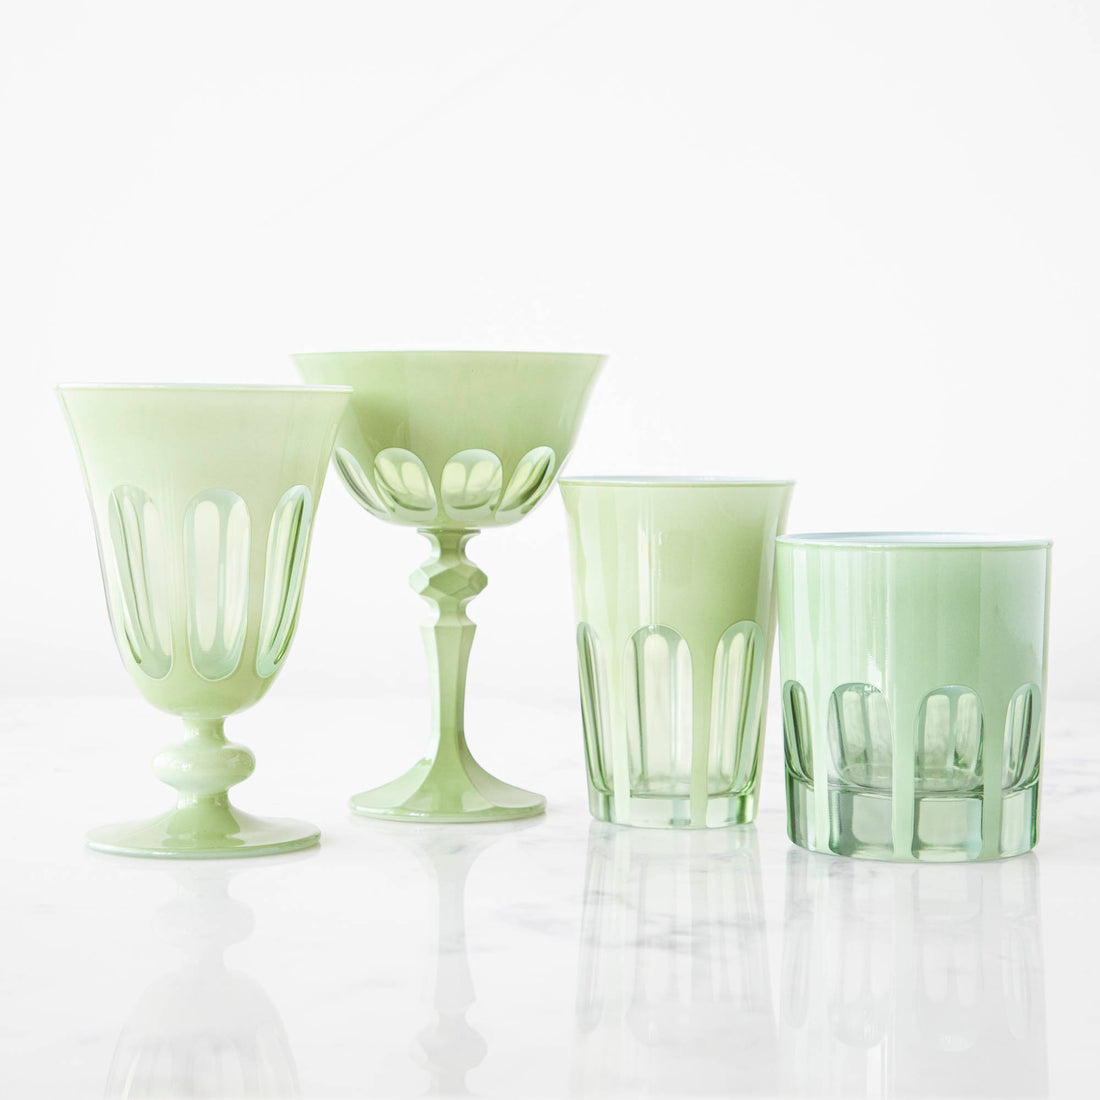 A set of SIR/MADAM Rialto Pale Sage Glasses and a bowl on a marble table.